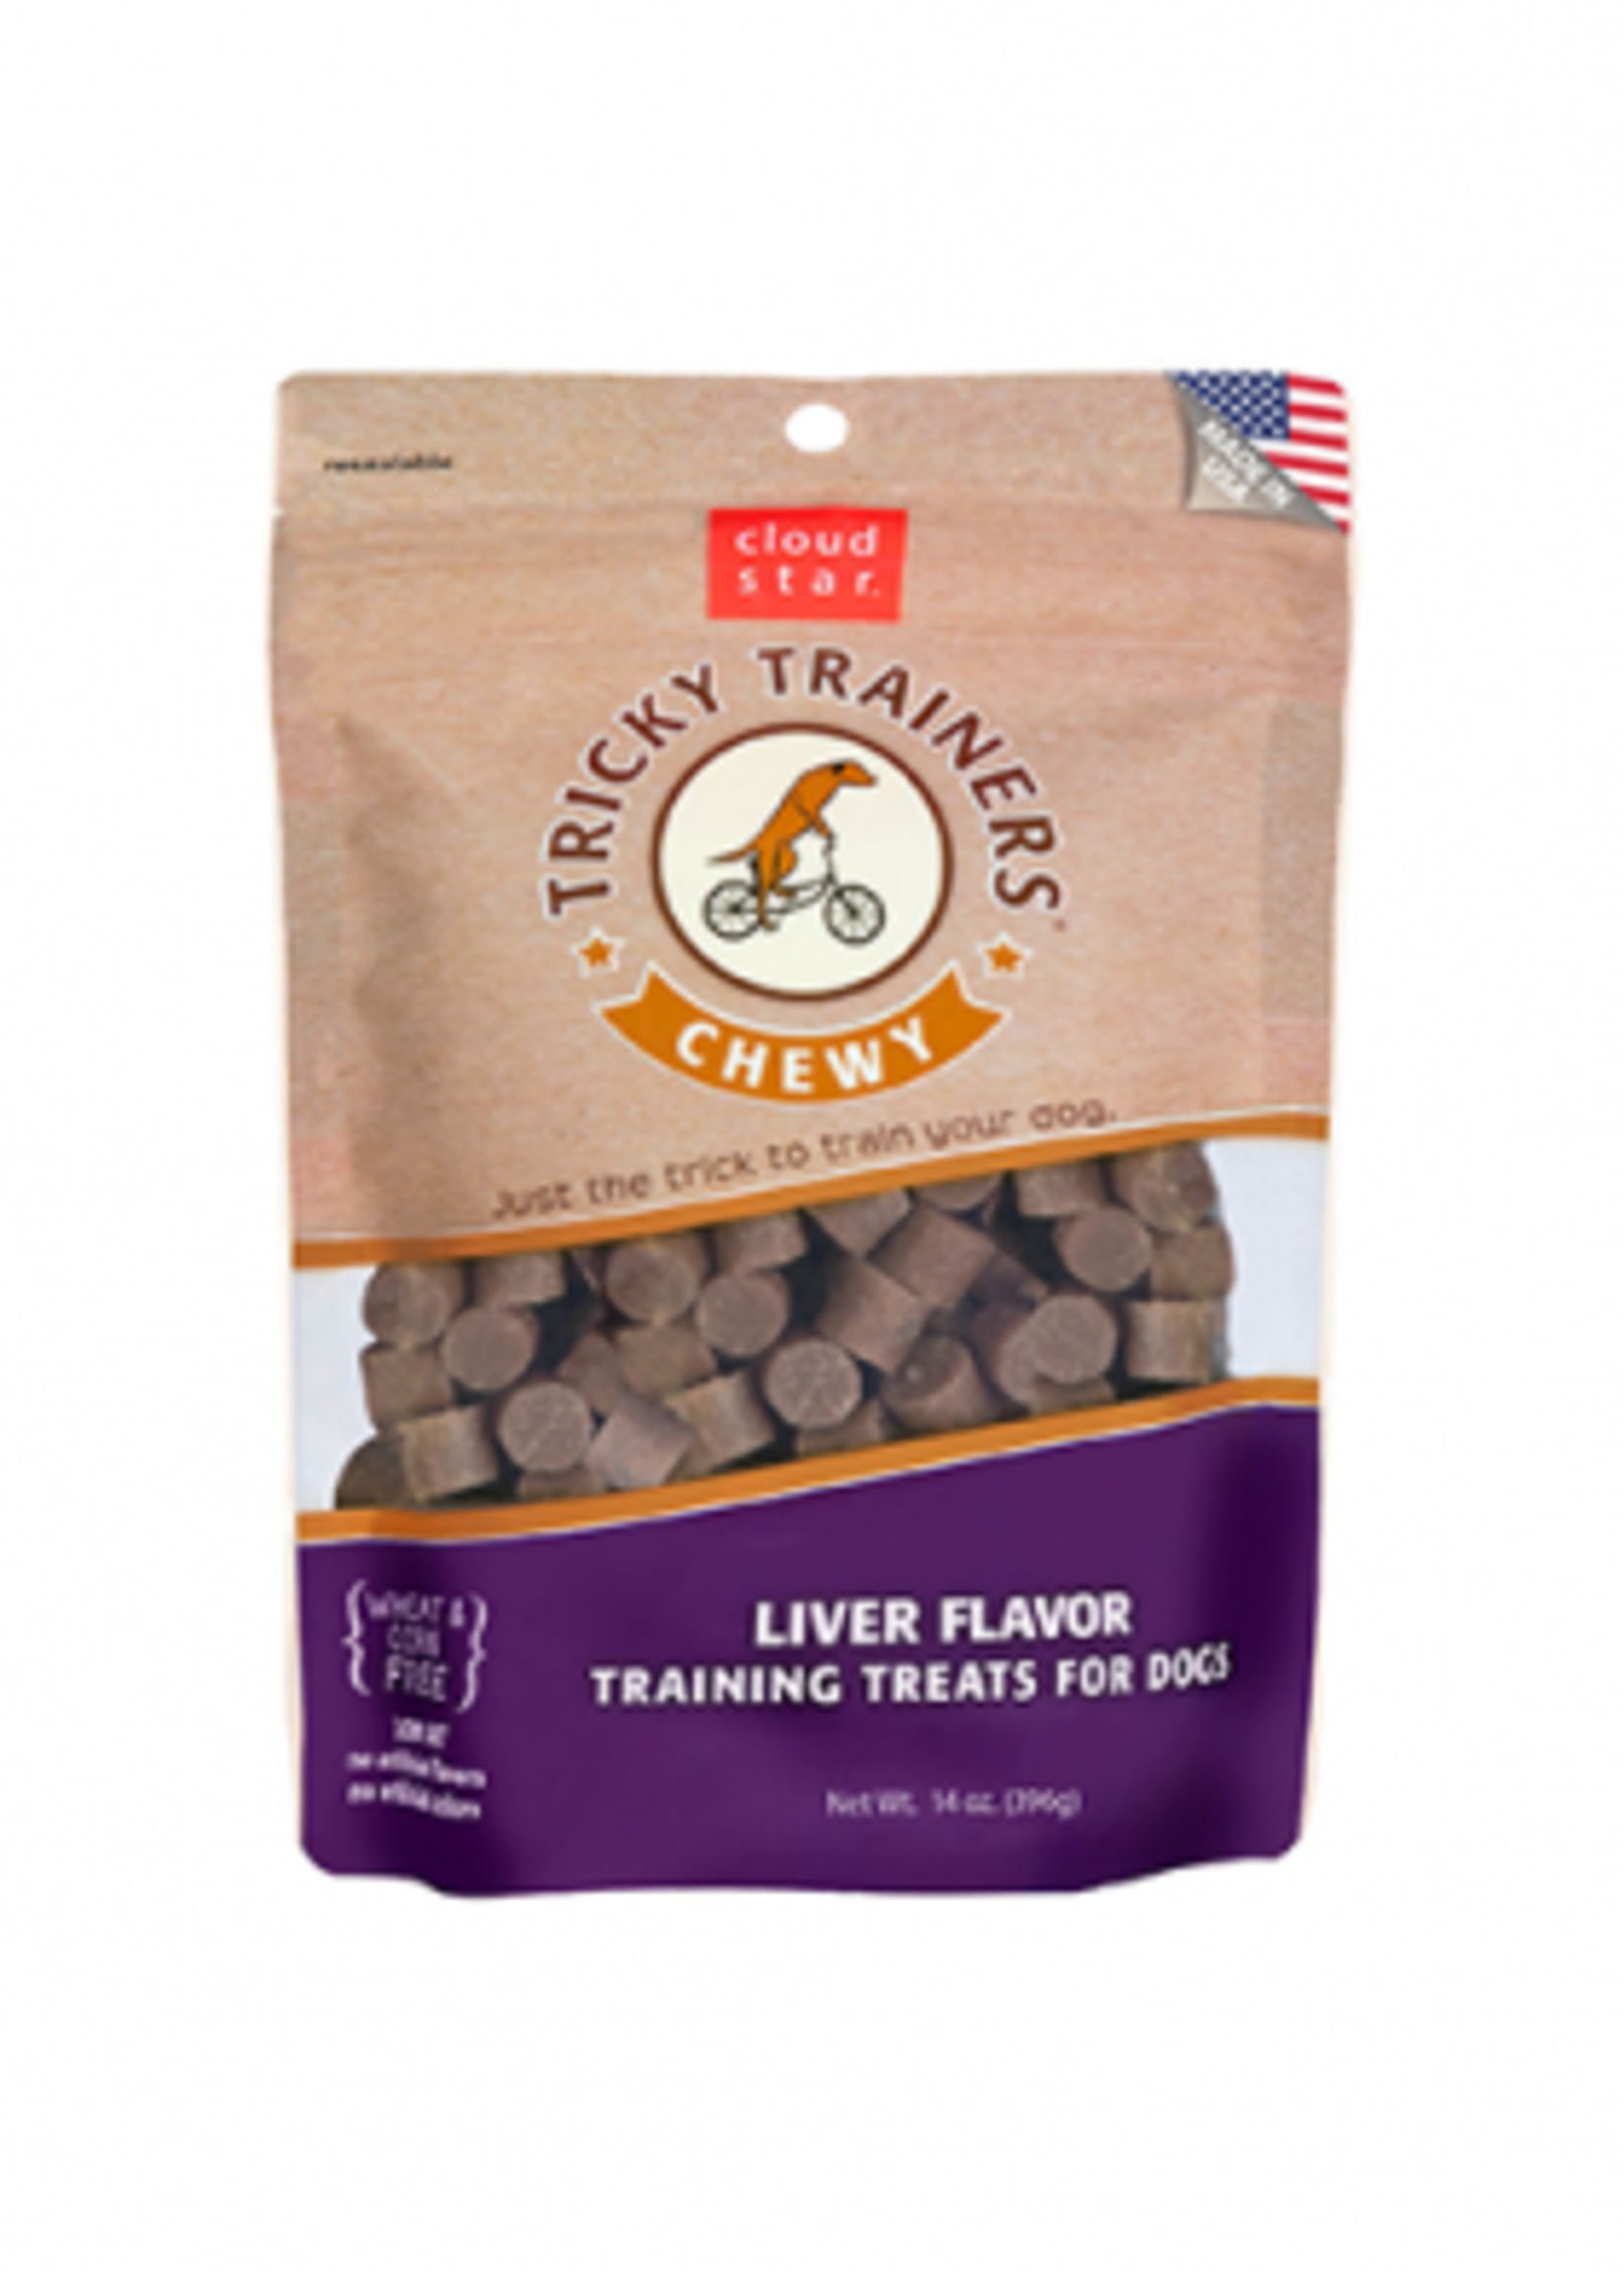 Cloud Star Tricky Trainers Chewy Chicken Liver 14oz